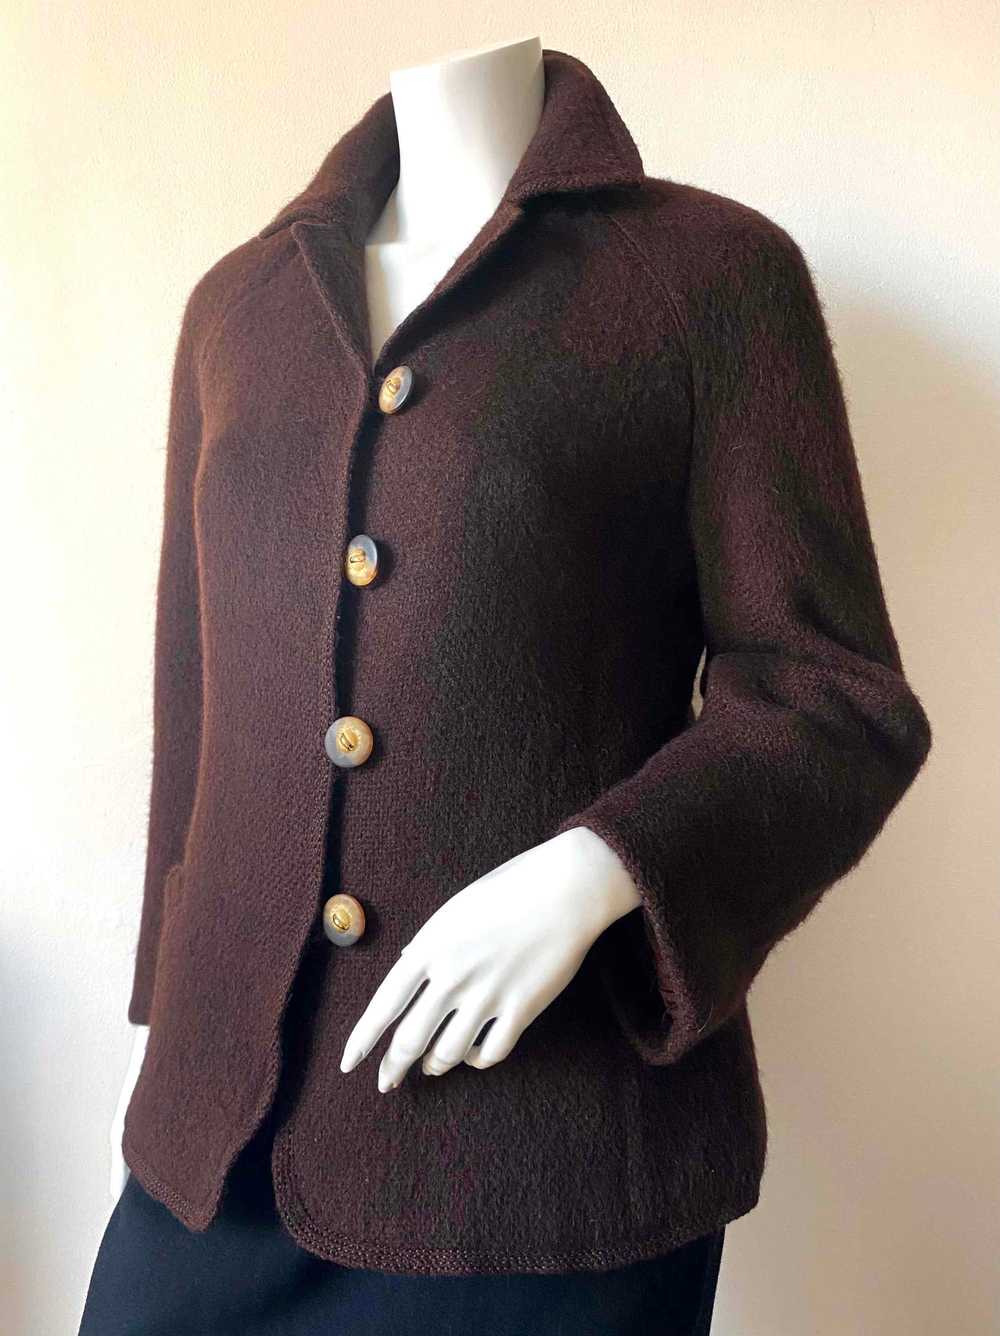 Wool jacket - Cropped knitted mohair jacket - image 5